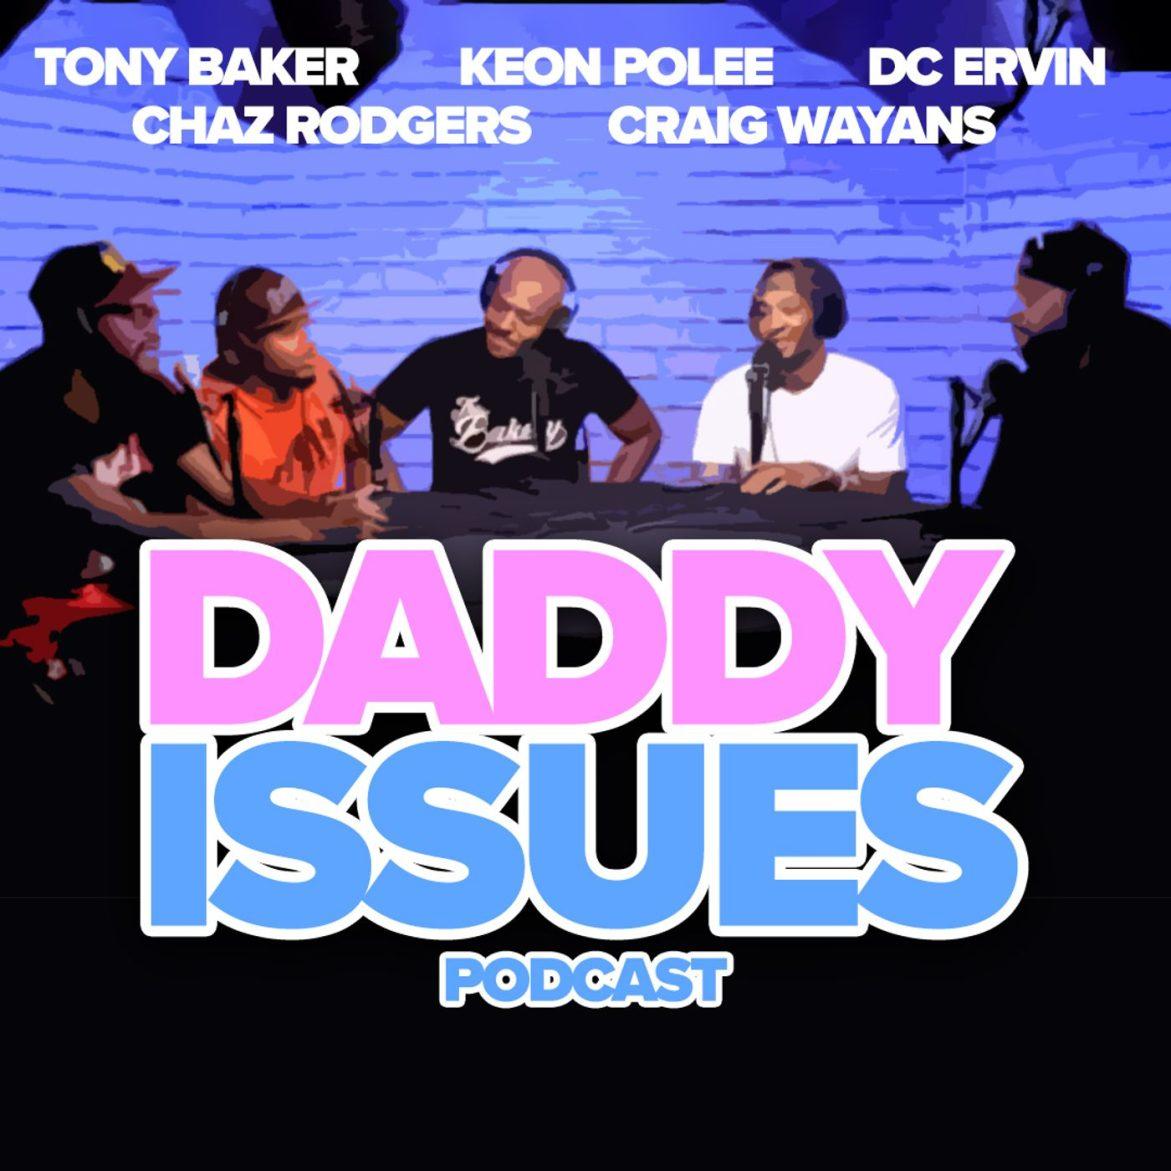 Black Podcasting - Daddy Issues: Chaz is picky